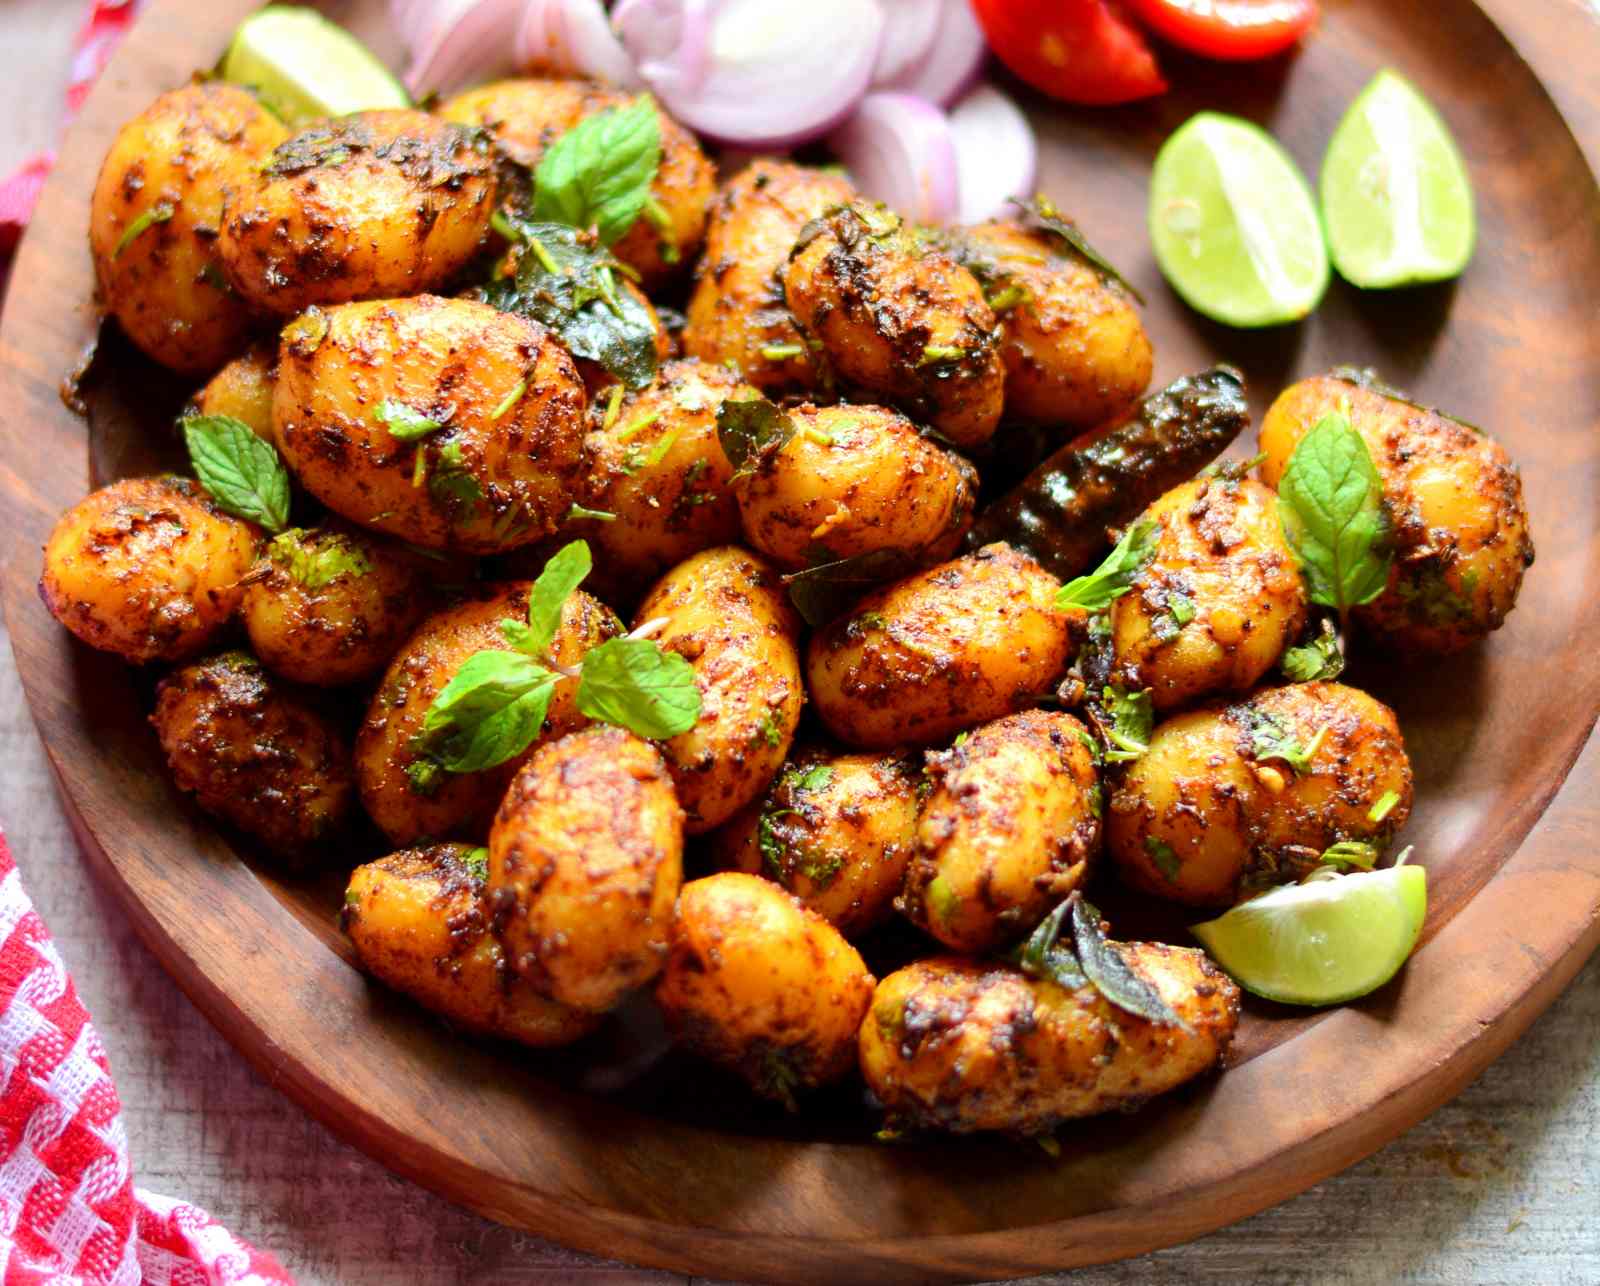 Spicy and Tasty Baby Potatoes